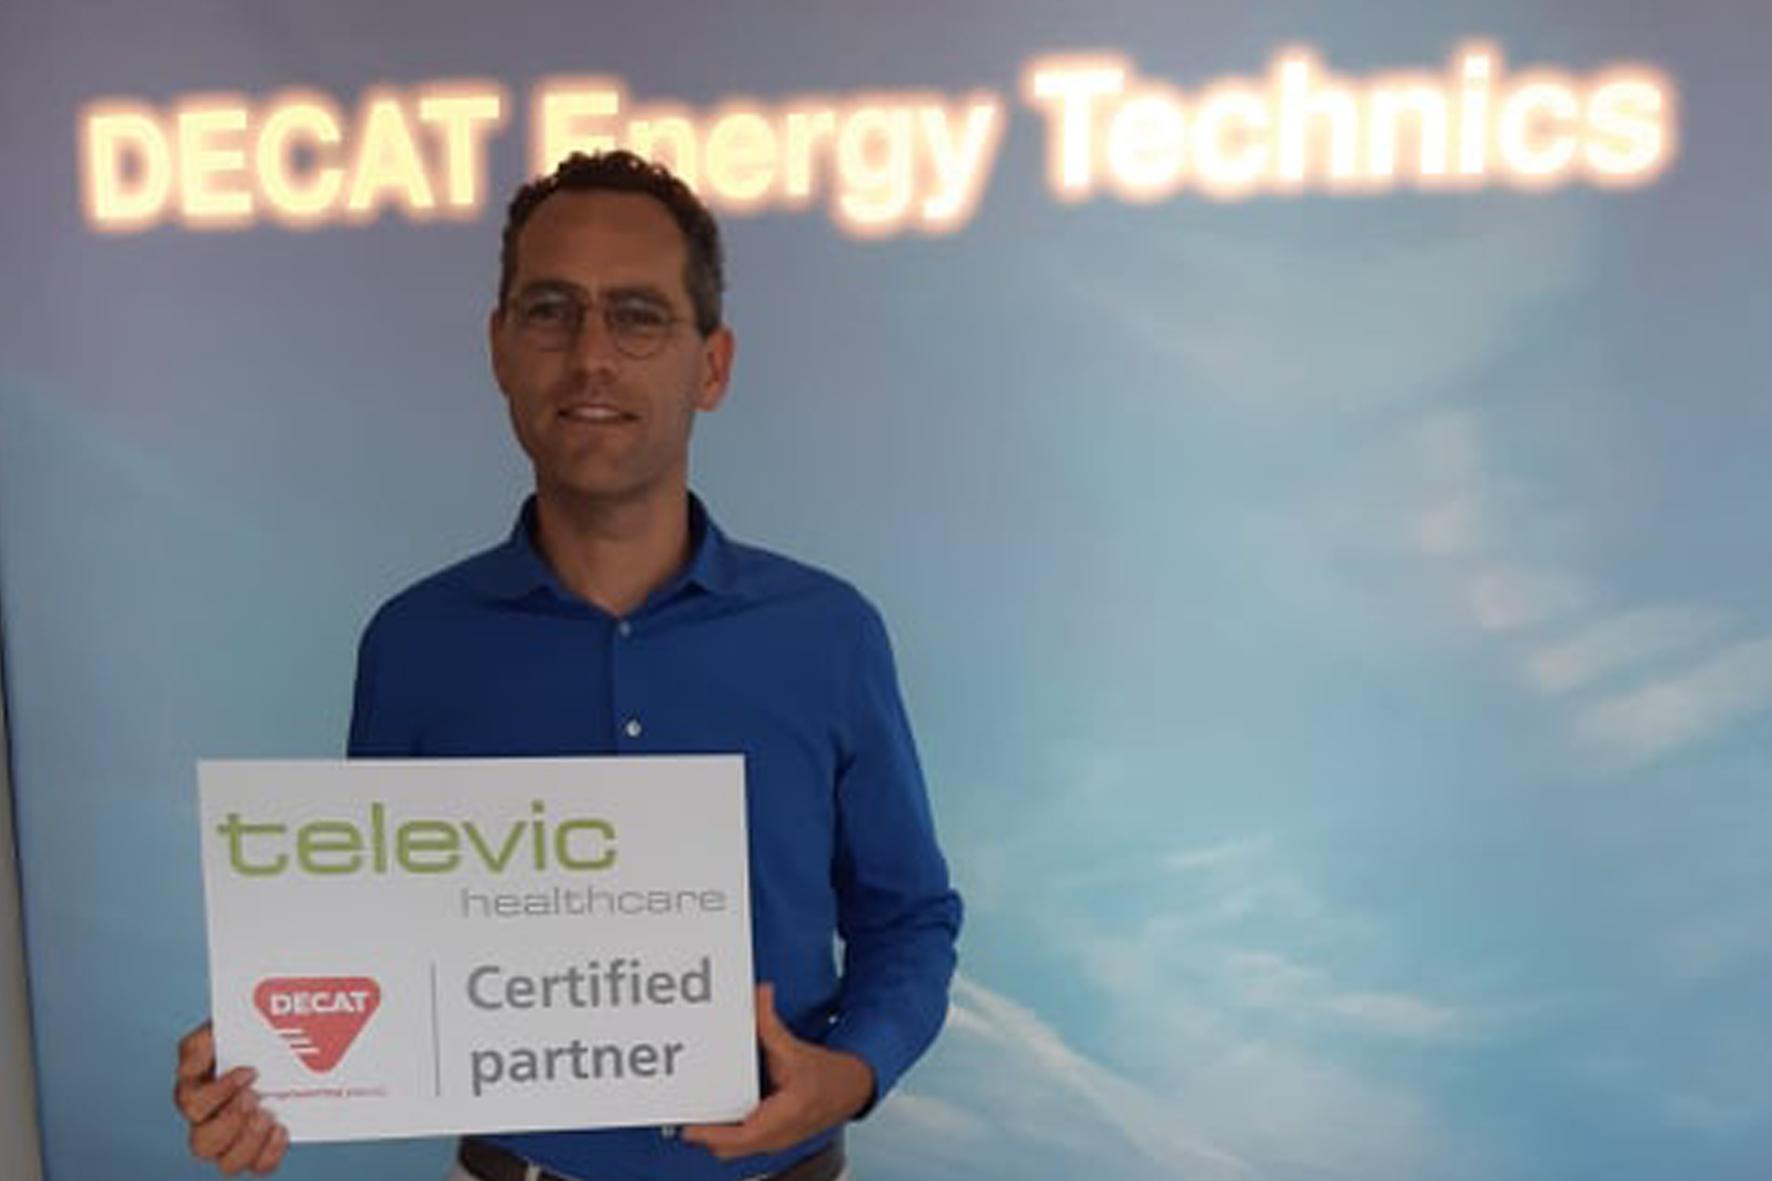 Certified Televic partner Decat